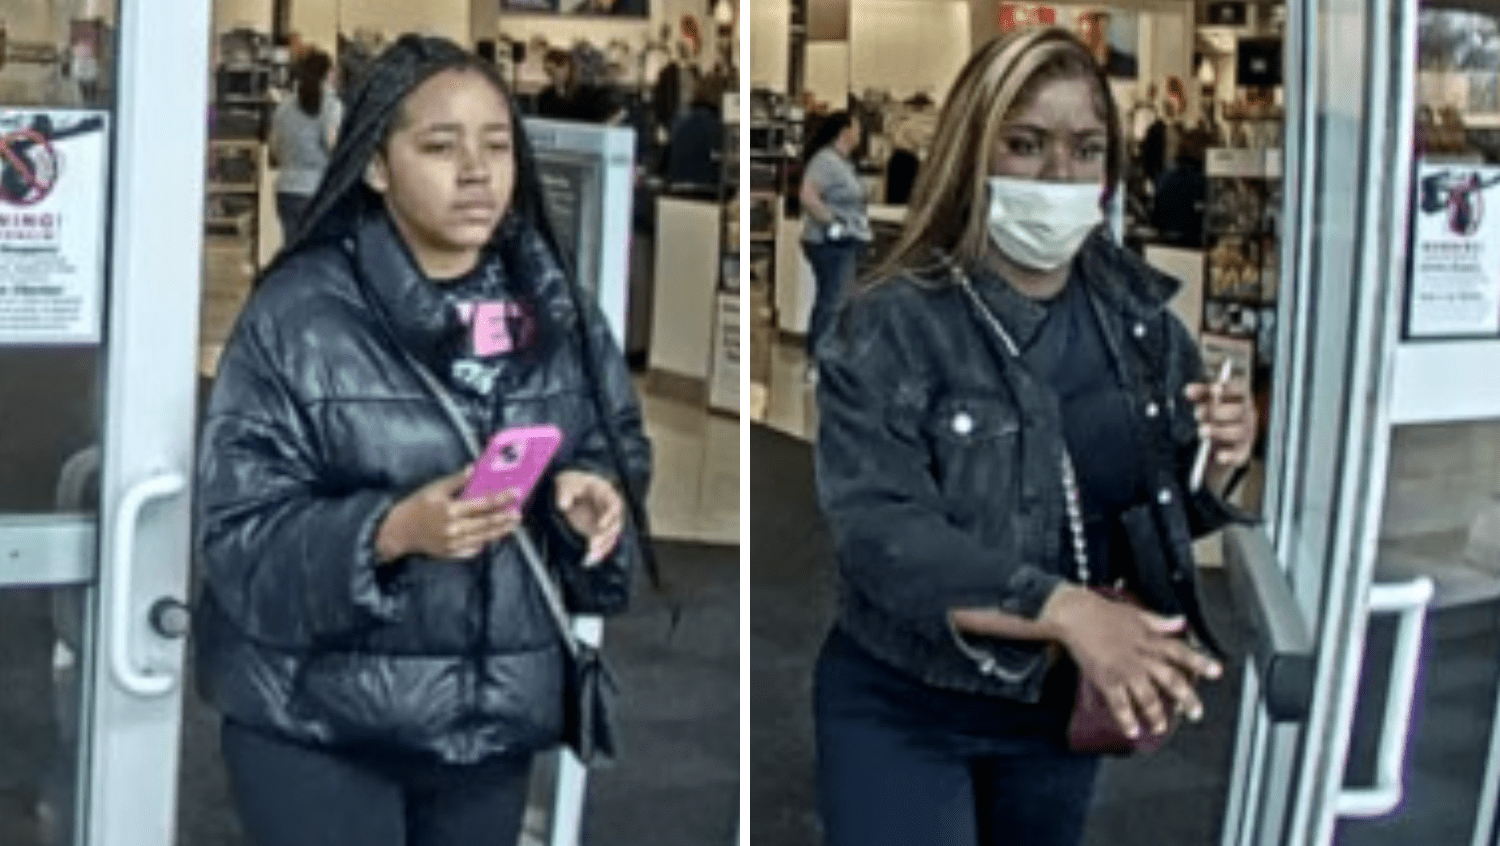 Police in Bensalem are seeking these women after a Kohl's on Street Road was robbed on Feb. 12.